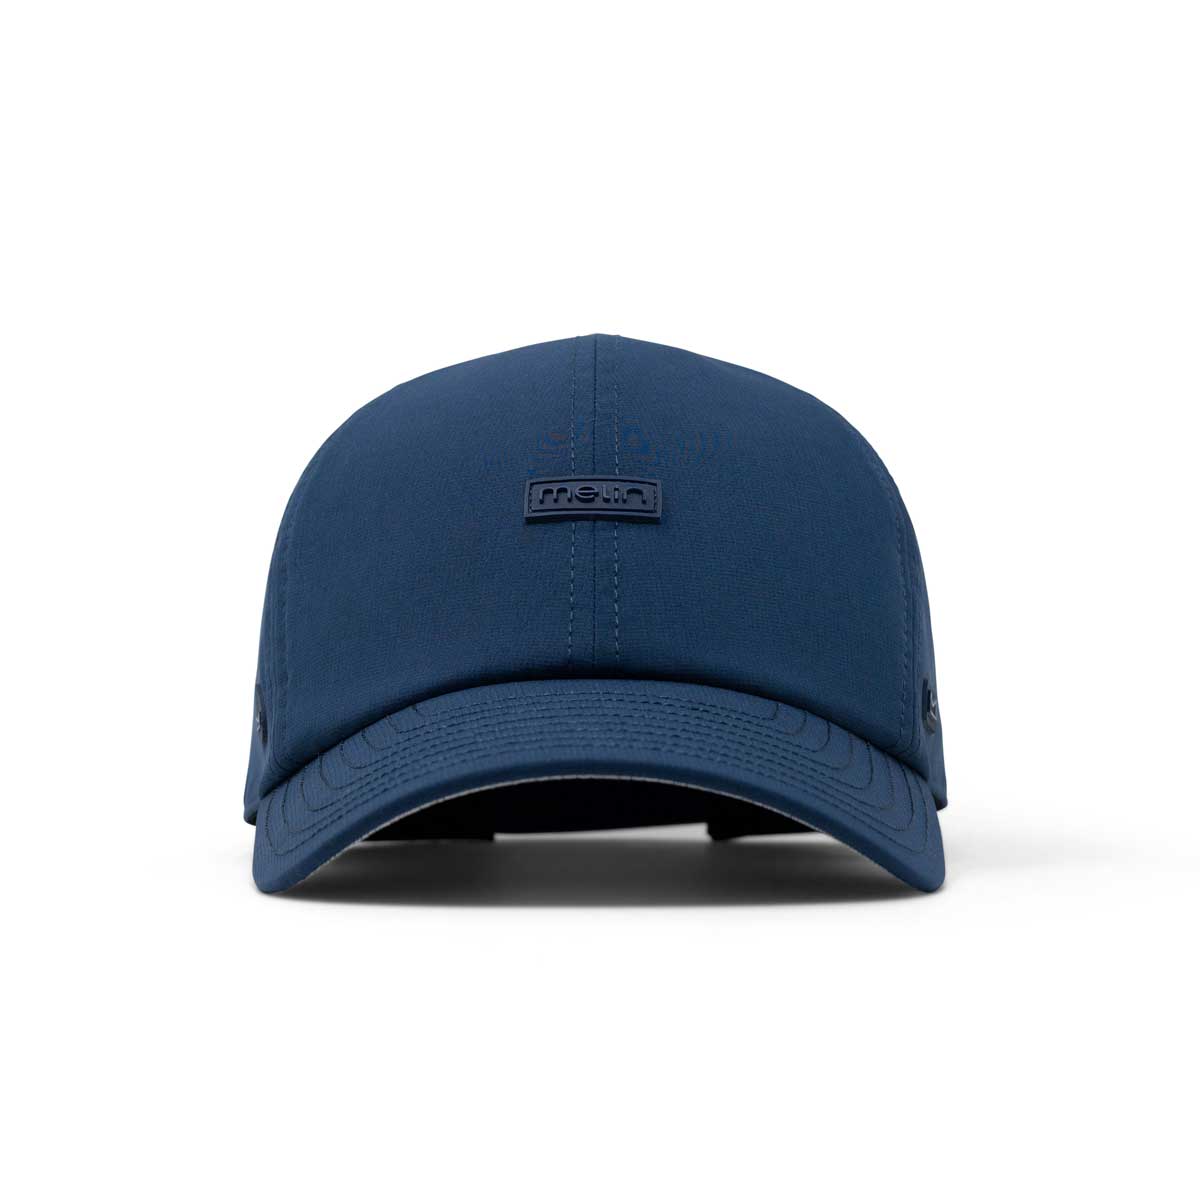 Melin: The Legend Hydro Hat